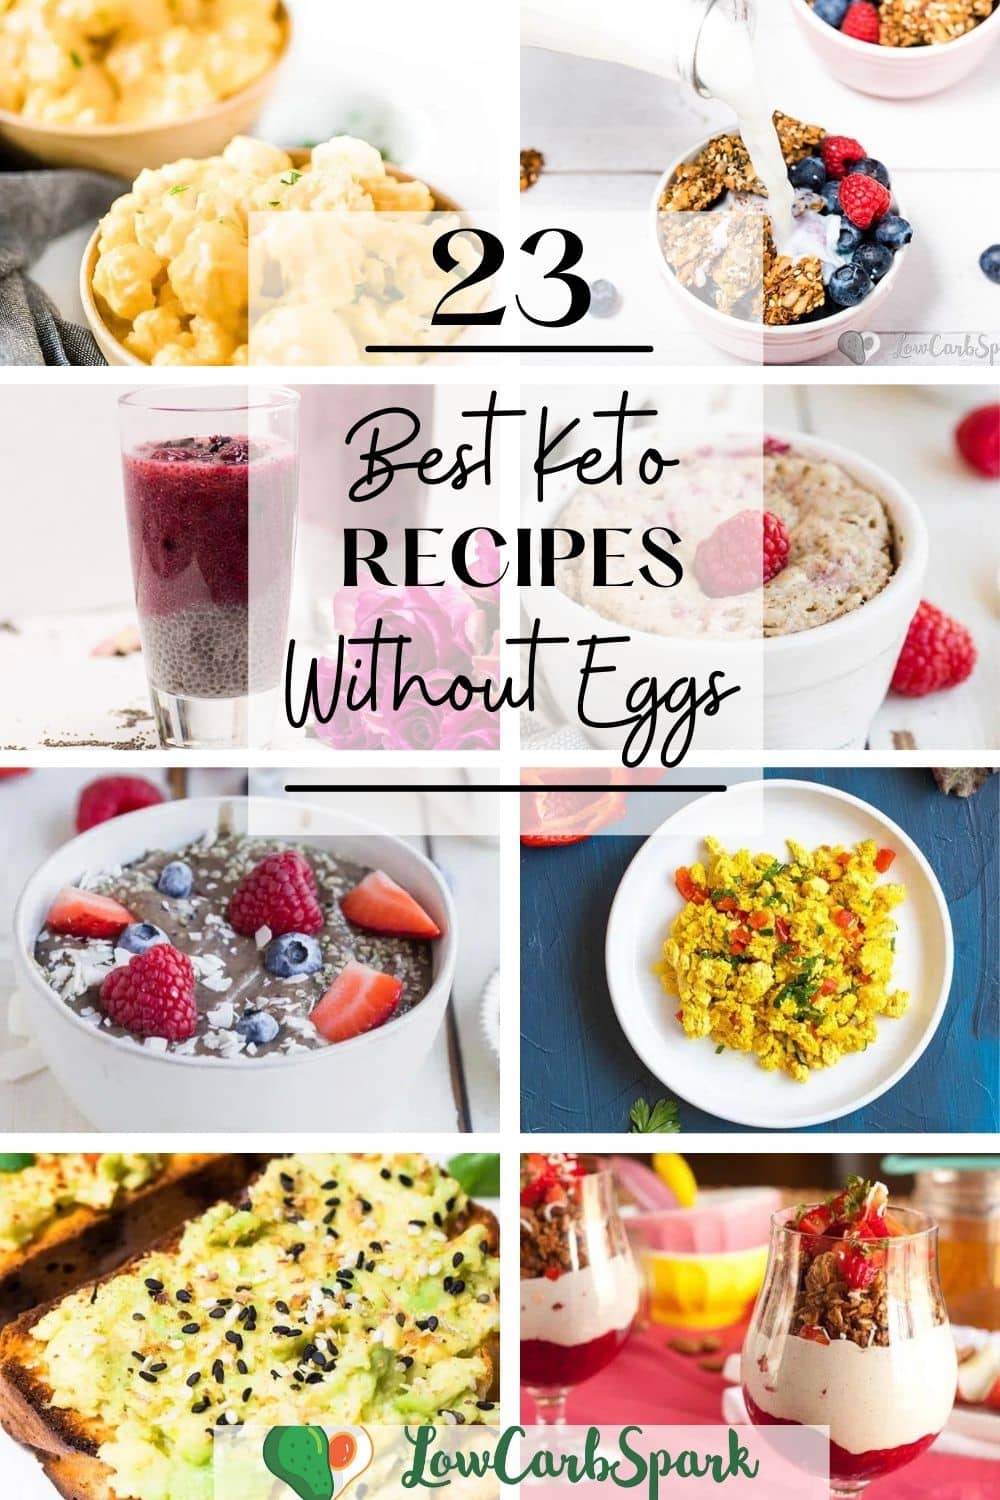 23 Best Keto Recipes without Eggs